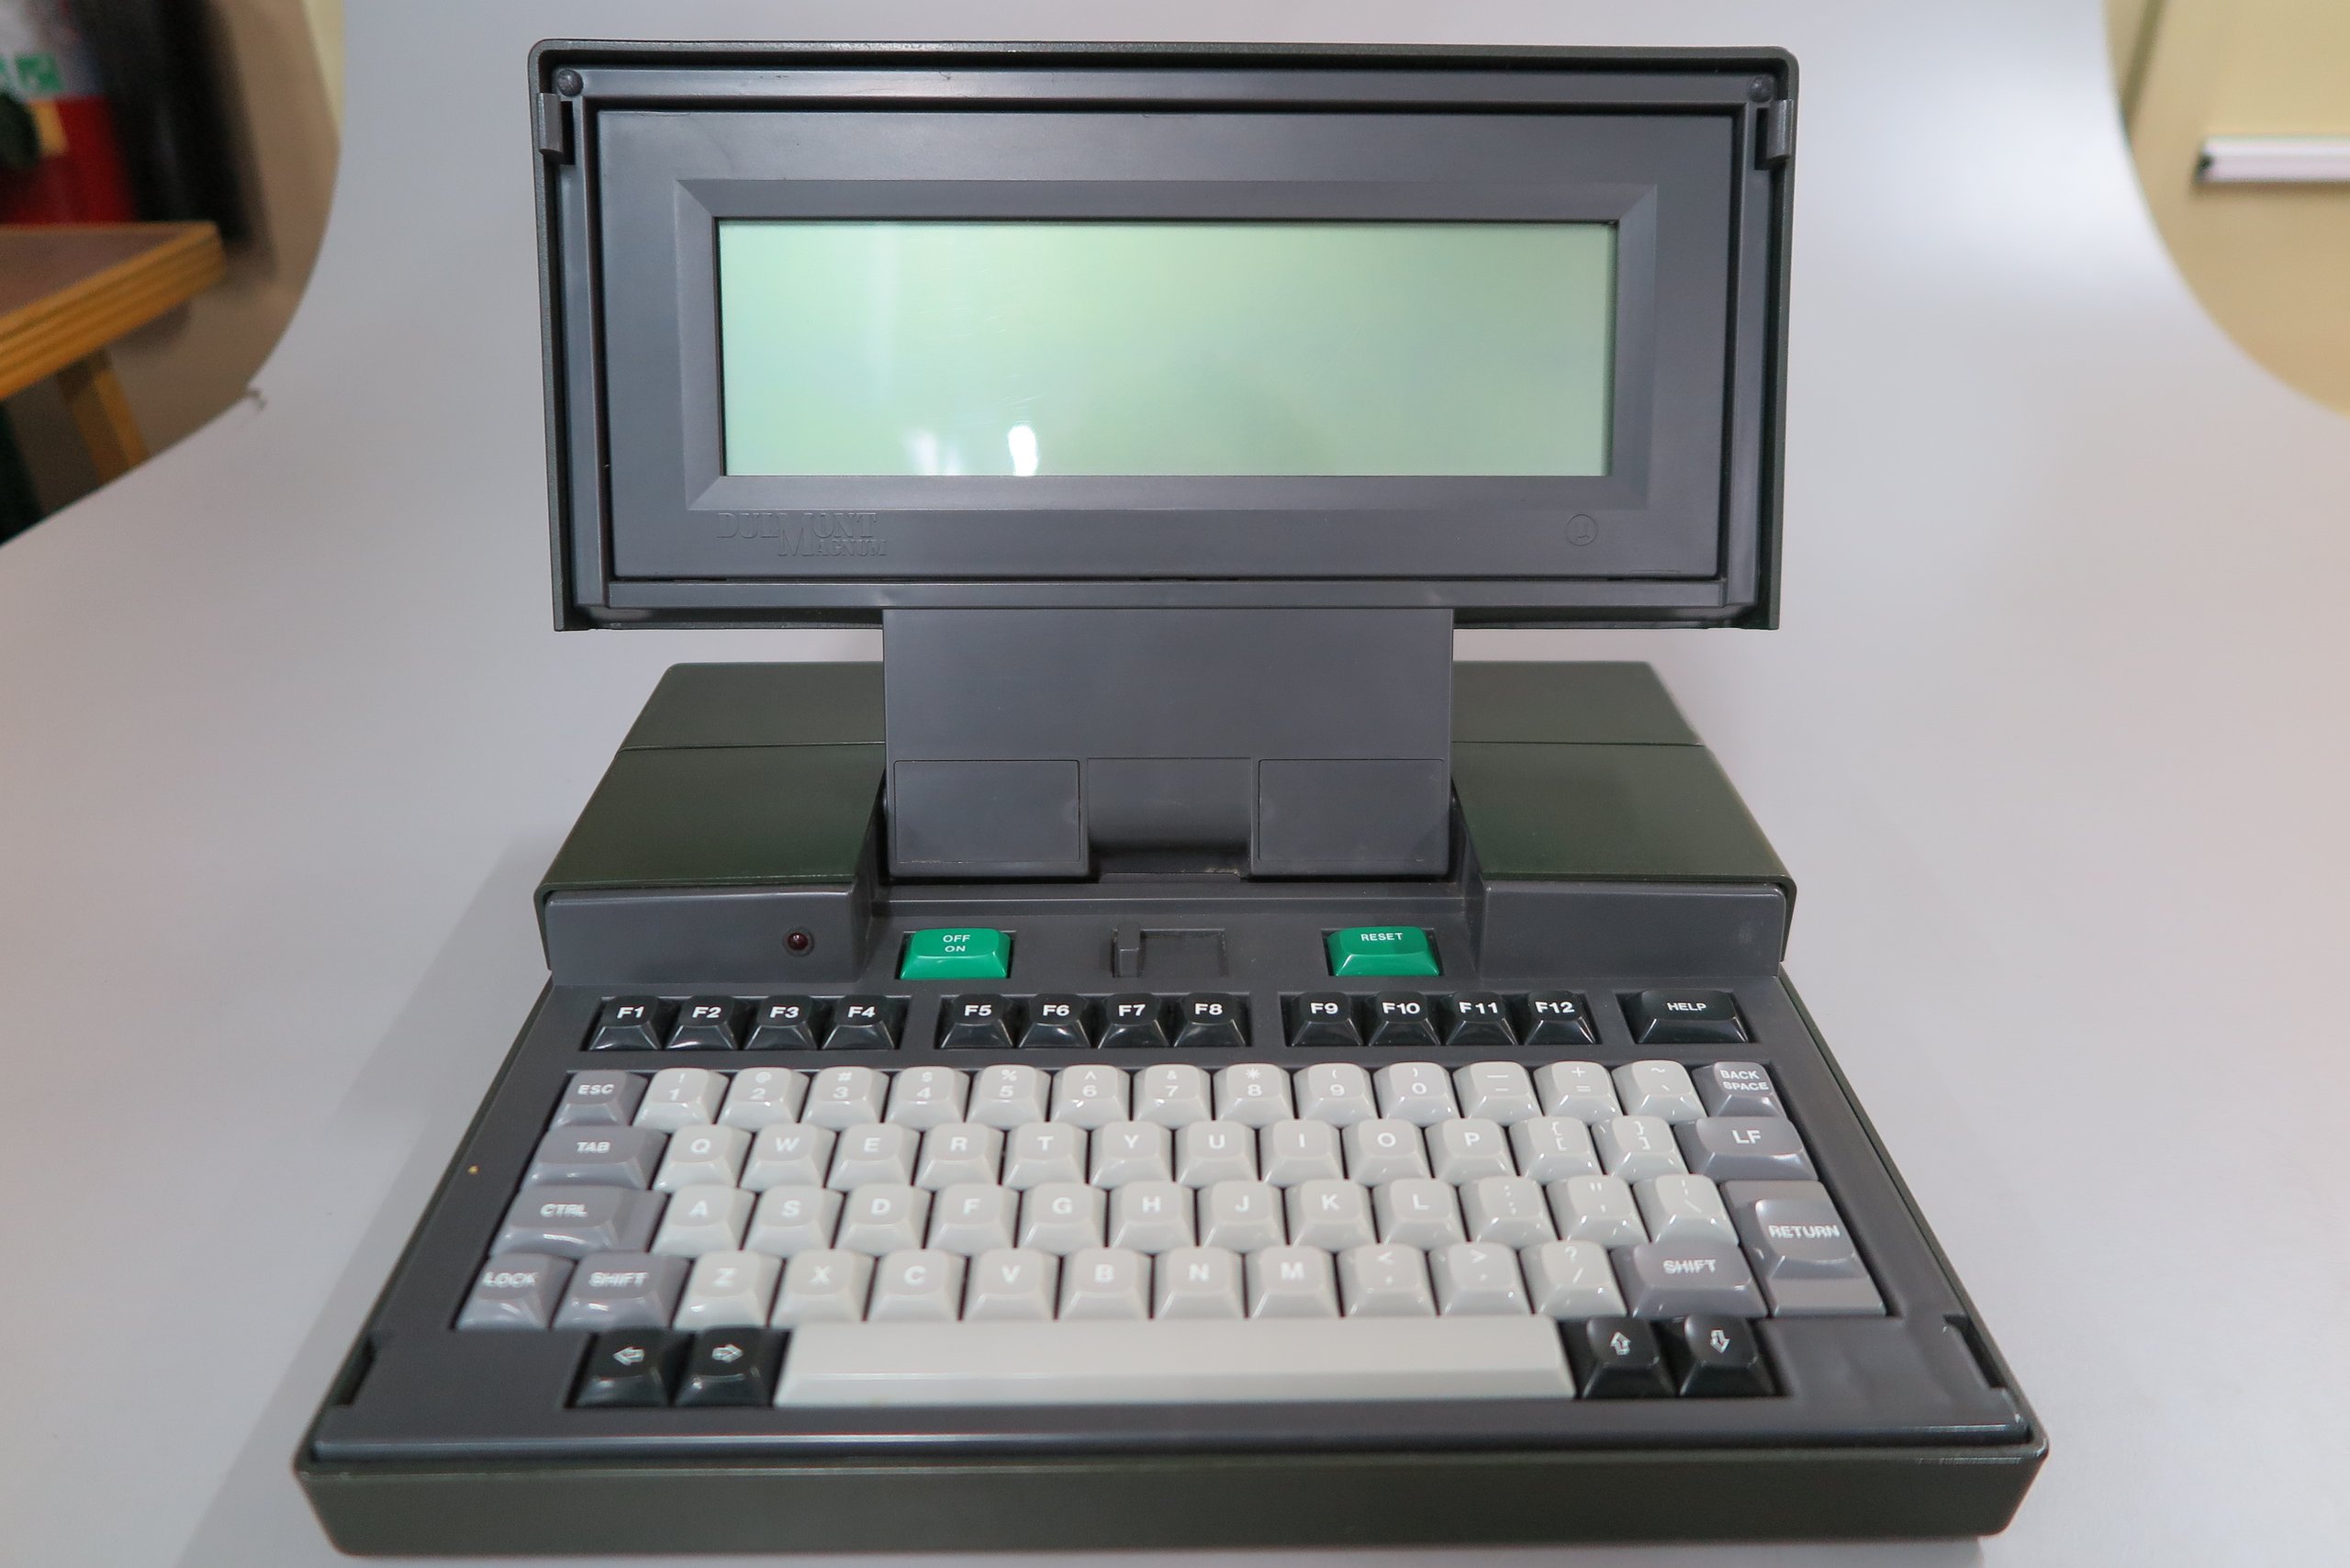 Laptop computer by Dulmont Electronic Systems